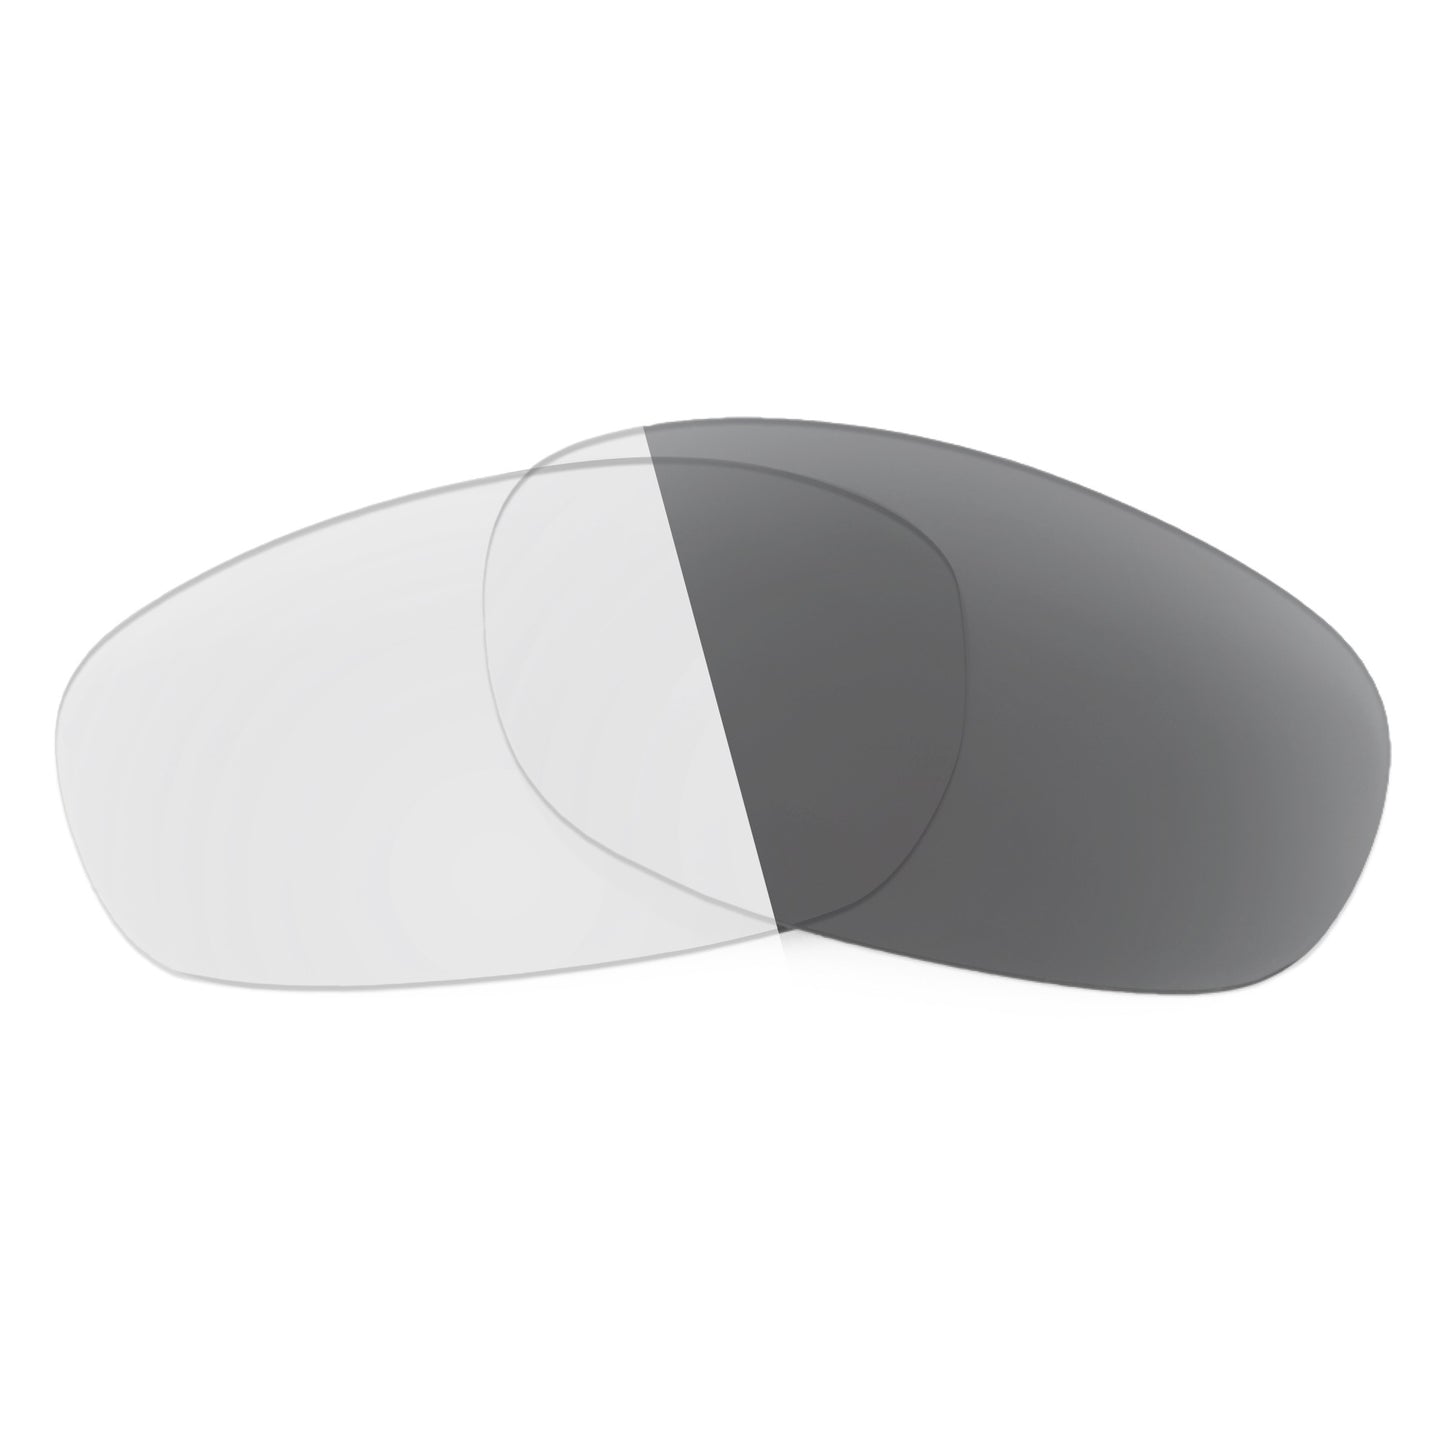 Revant replacement lenses for Ray-Ban Balorama RB4089 62mm Non-Polarized Adapt Gray Photochromic